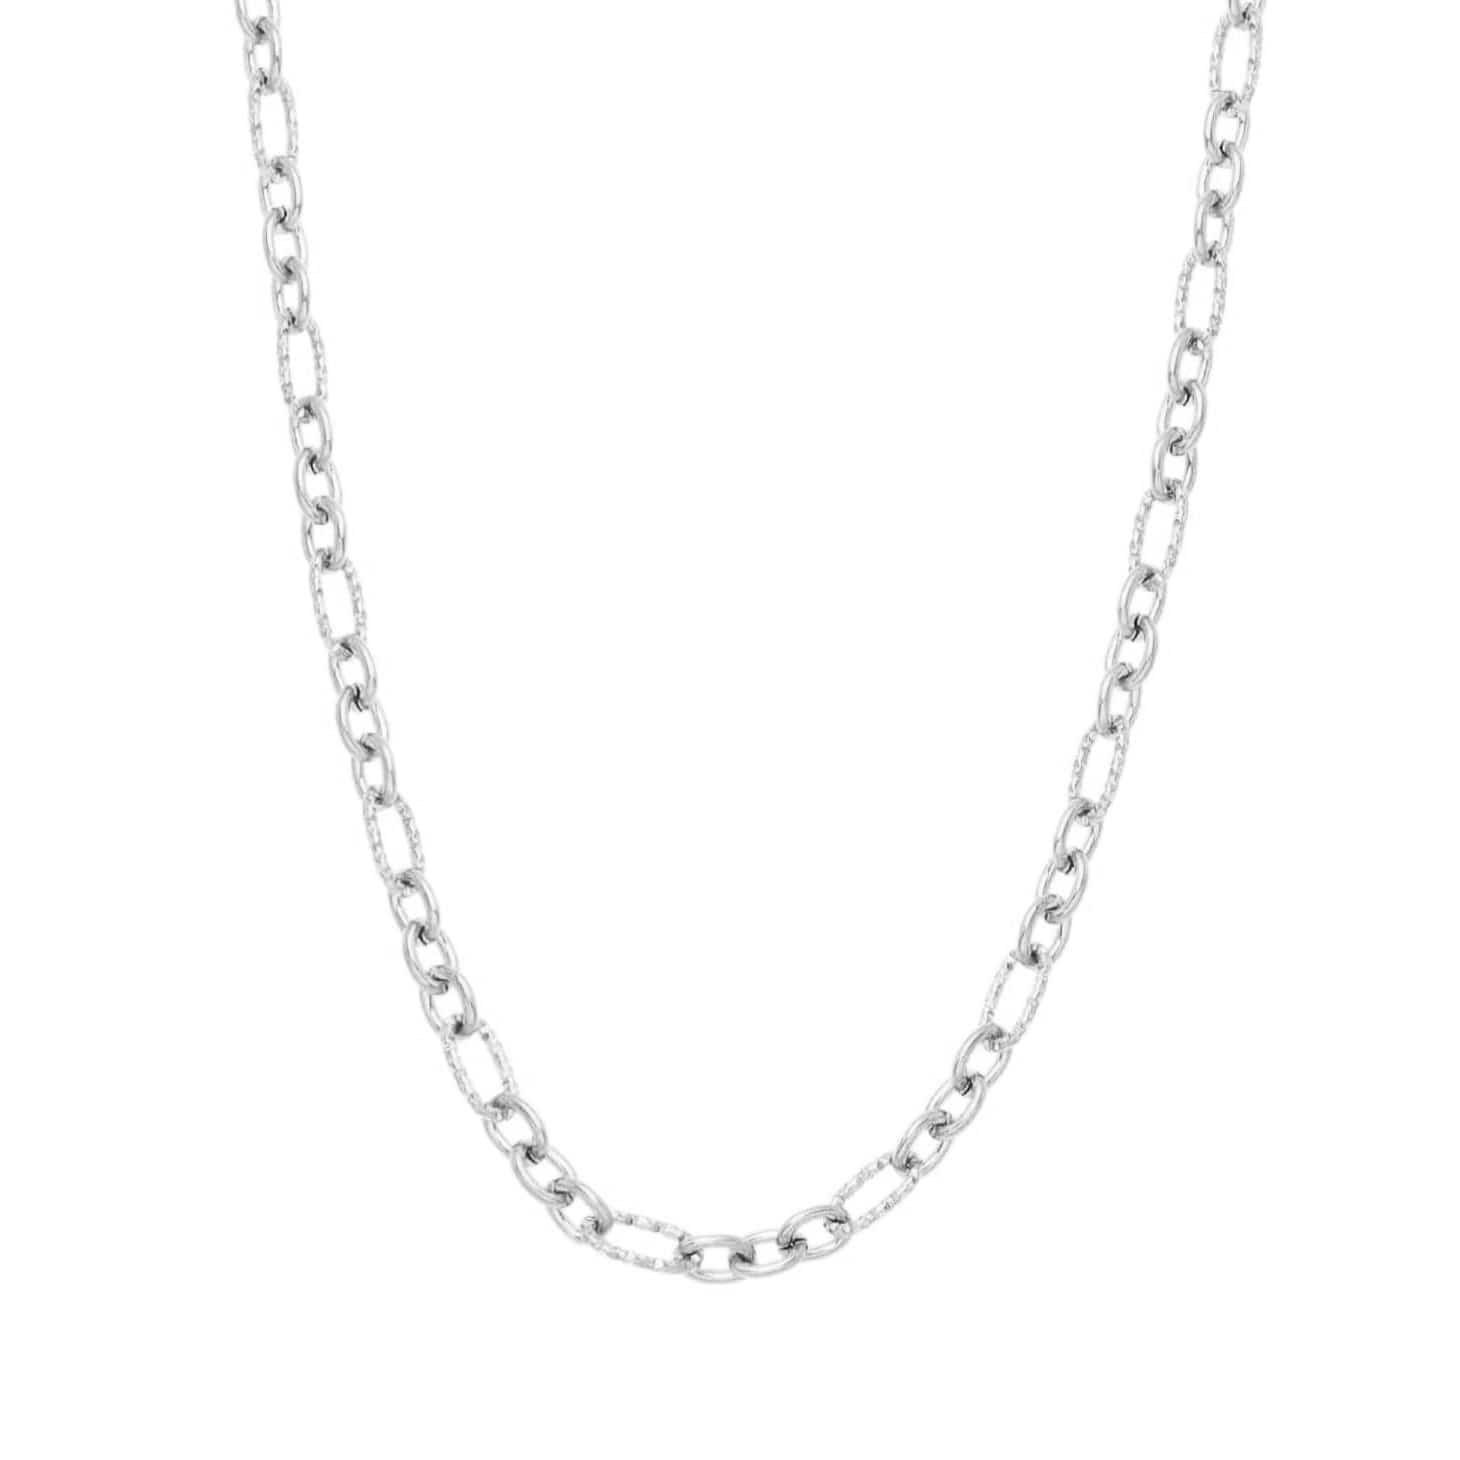 BohoMoon Stainless Steel Nellie Necklace Silver